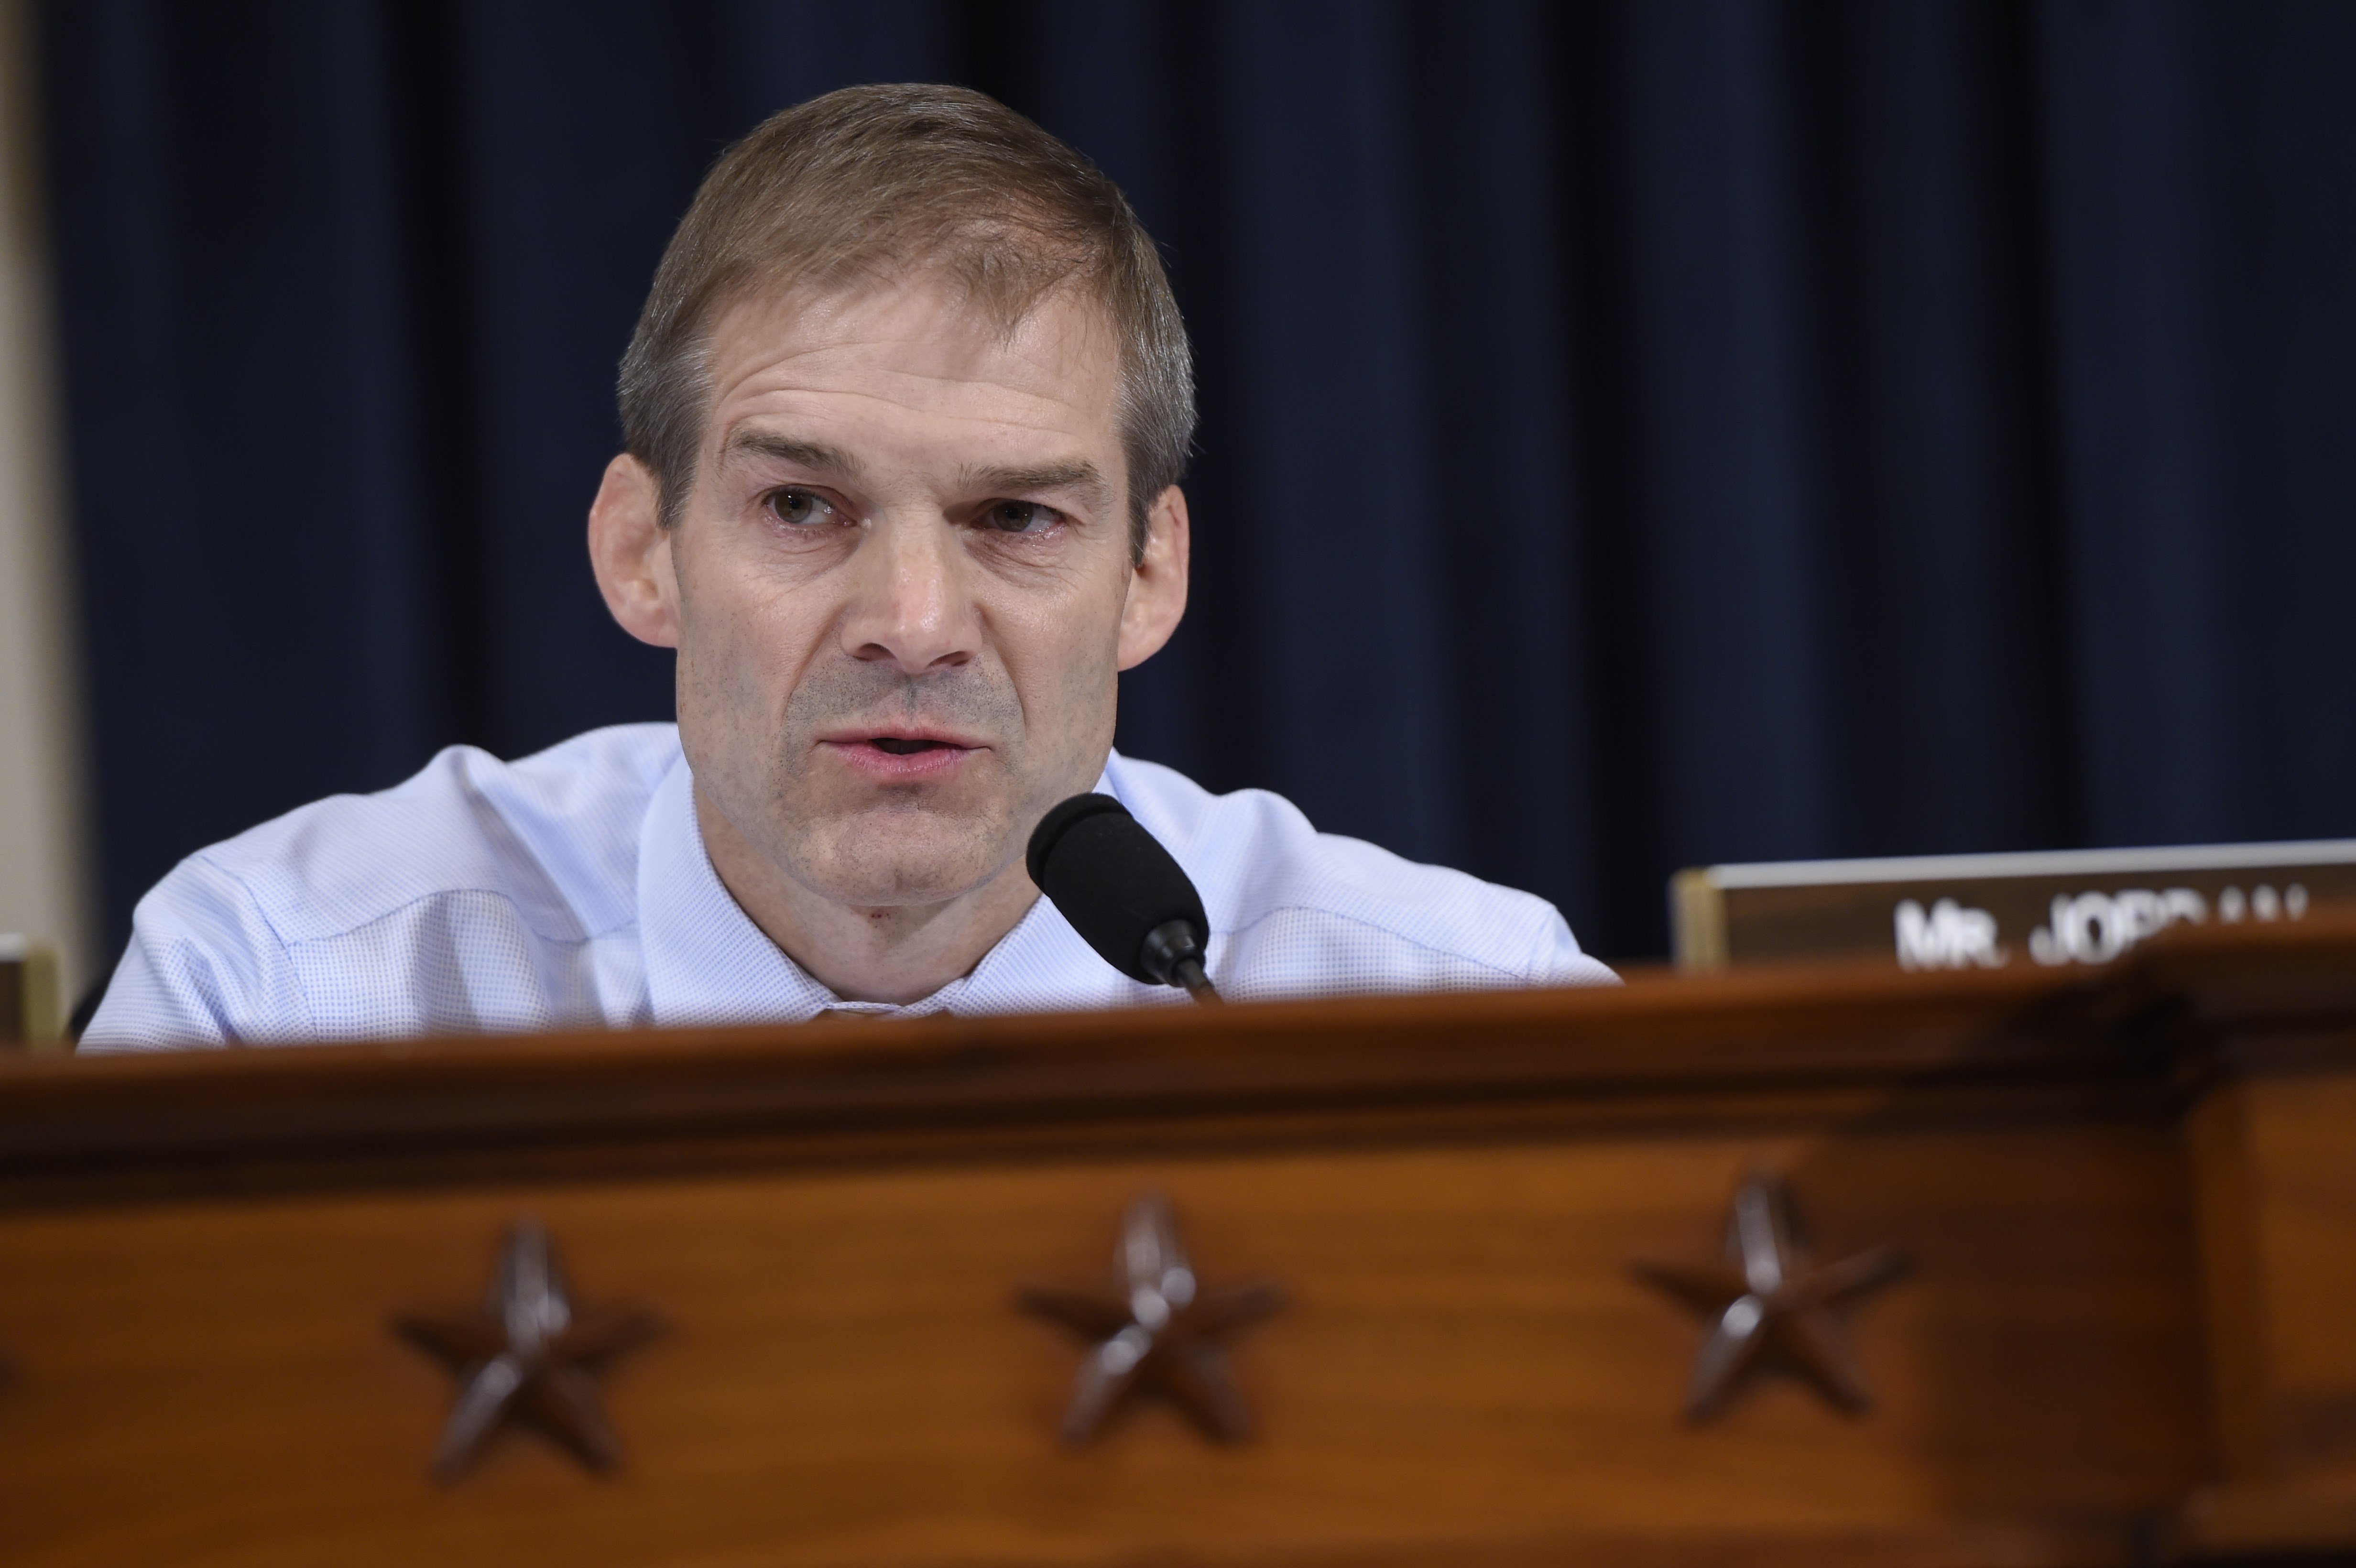 Republican US Representative from Ohio Jim Jordan questions former US Secretary of State and Democratic Presidential hopeful Hillary Clinton as she testifies before the House Select Committee on Benghazi on Capitol Hill in Washington, DC, October 22, 2015 (SAUL LOEB/AFP/Getty Images)